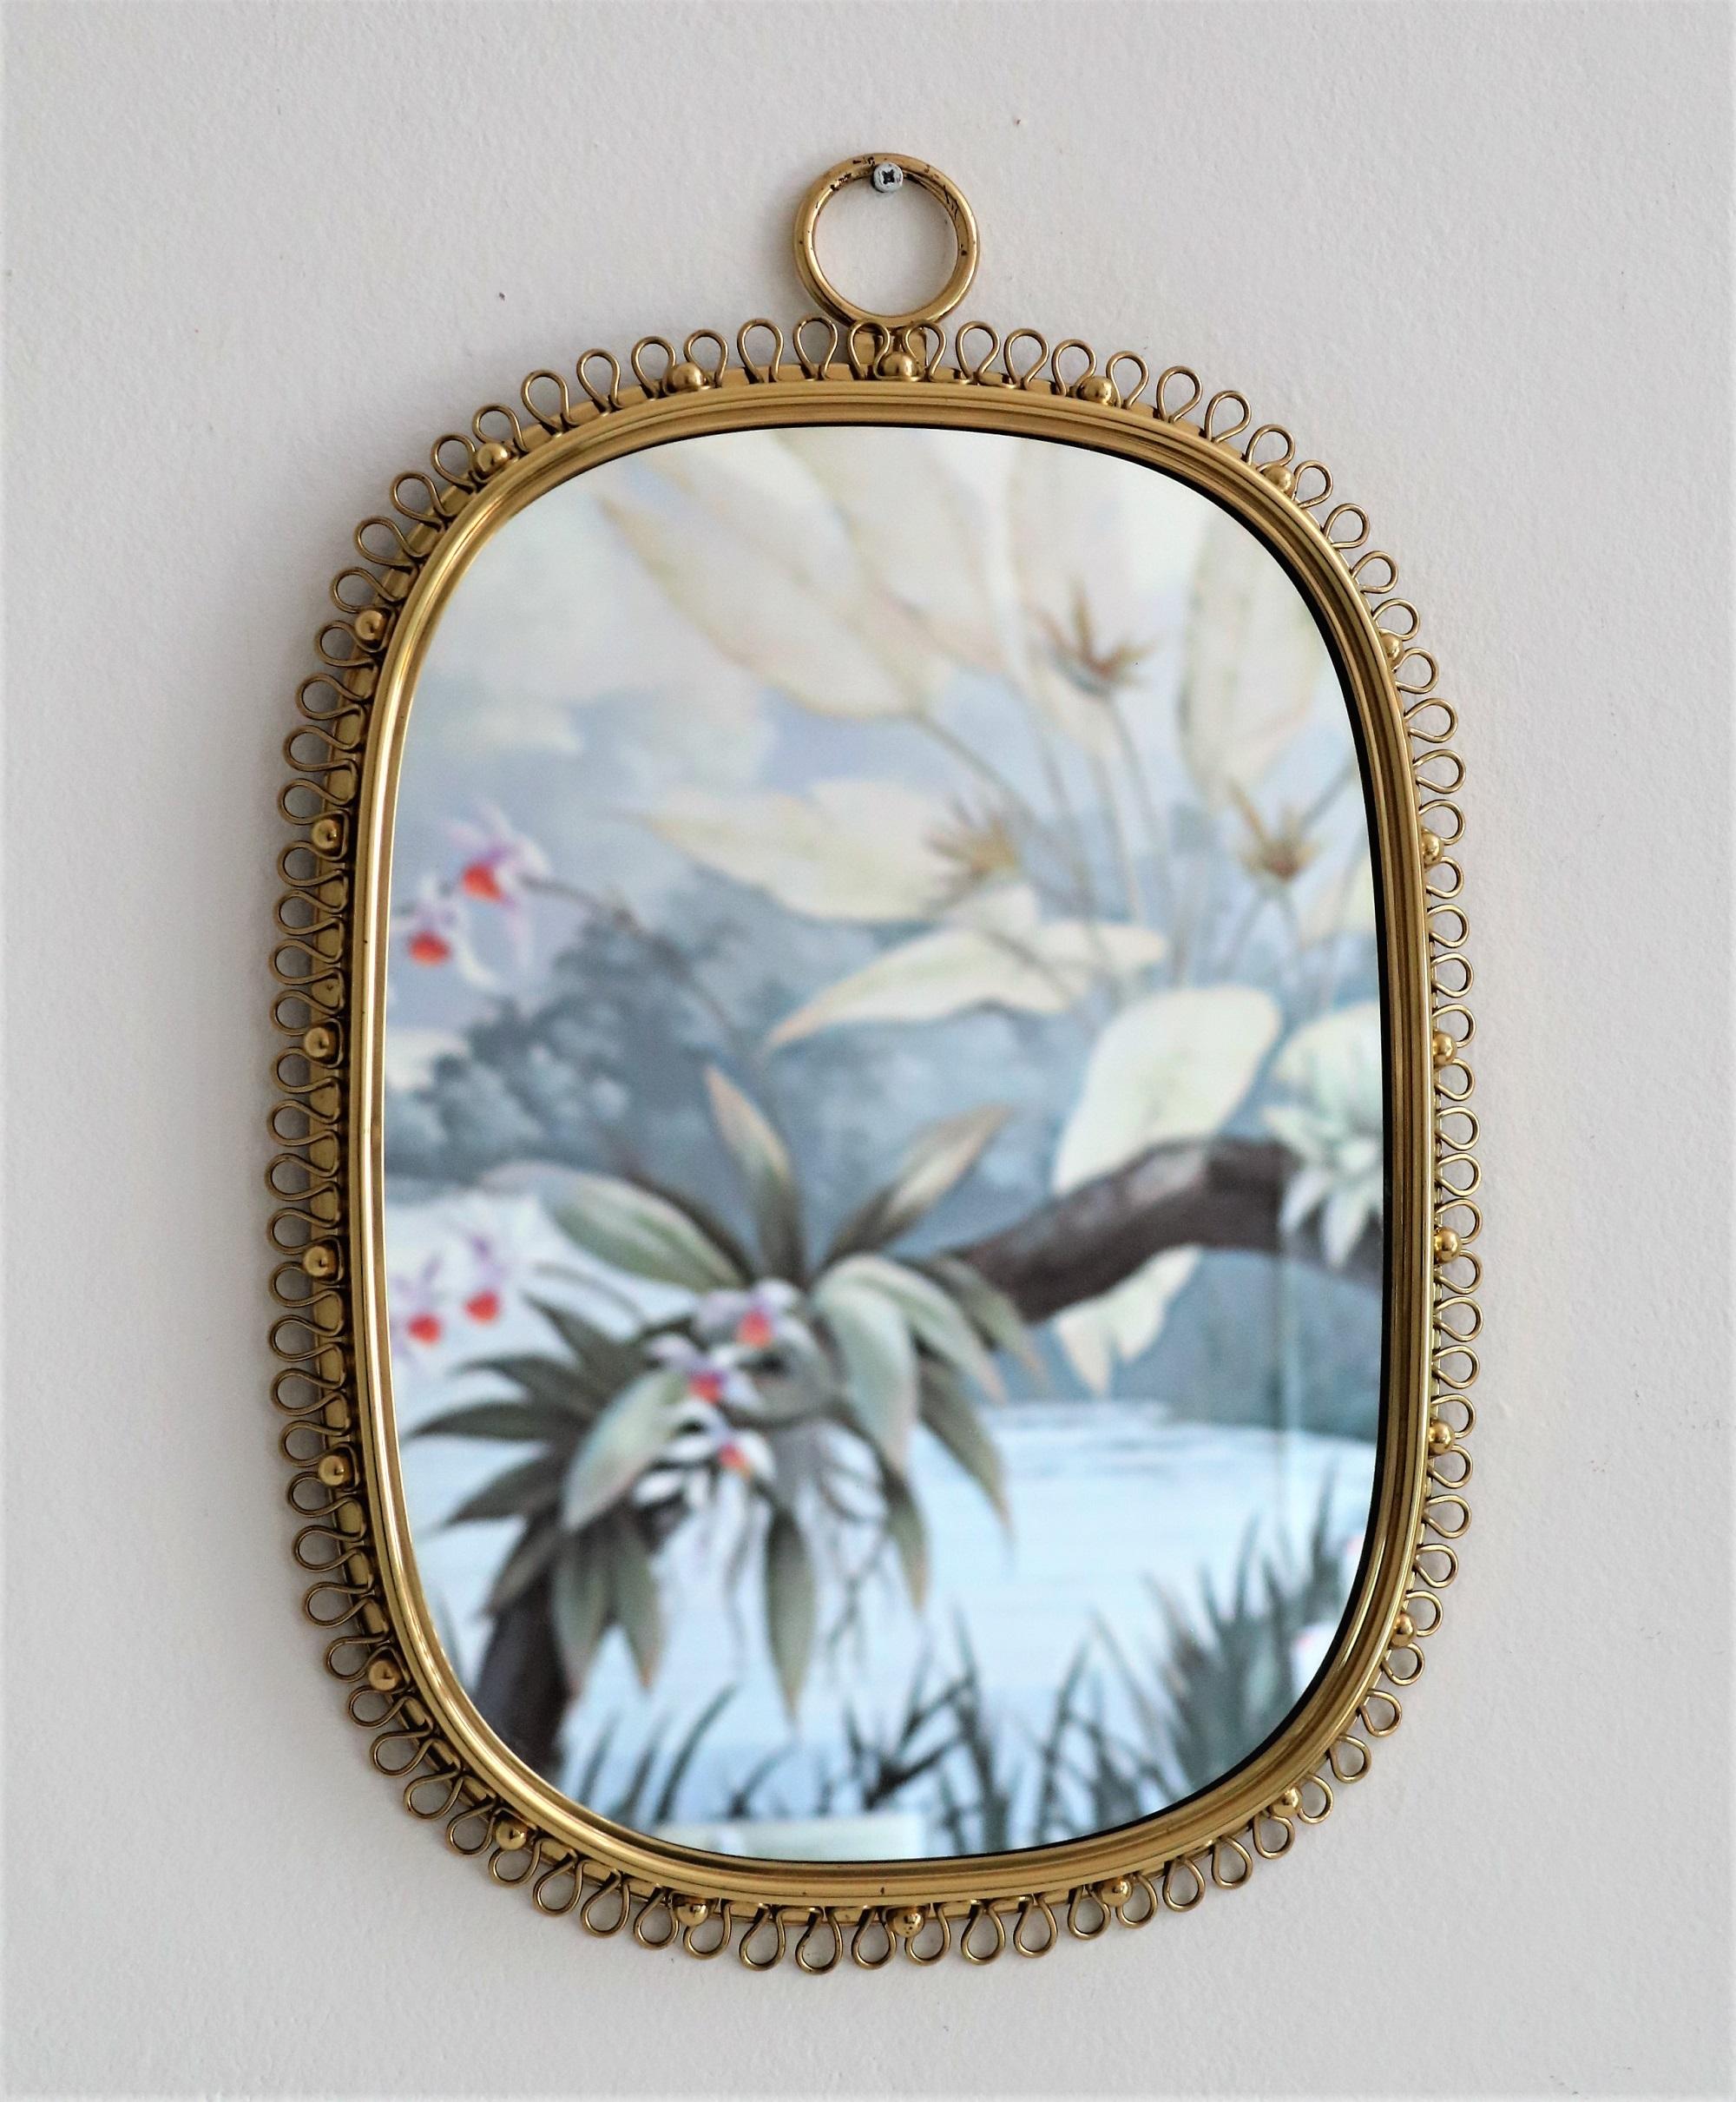 Gorgeous wall mirror designed by Austrian Josef Frank and manufactured in Sweden by Svensk Tenn in the midcentury.
This mirror is made of full shiny brass frame with spiral loop frame around and big round hanging loop on top.
You can easily